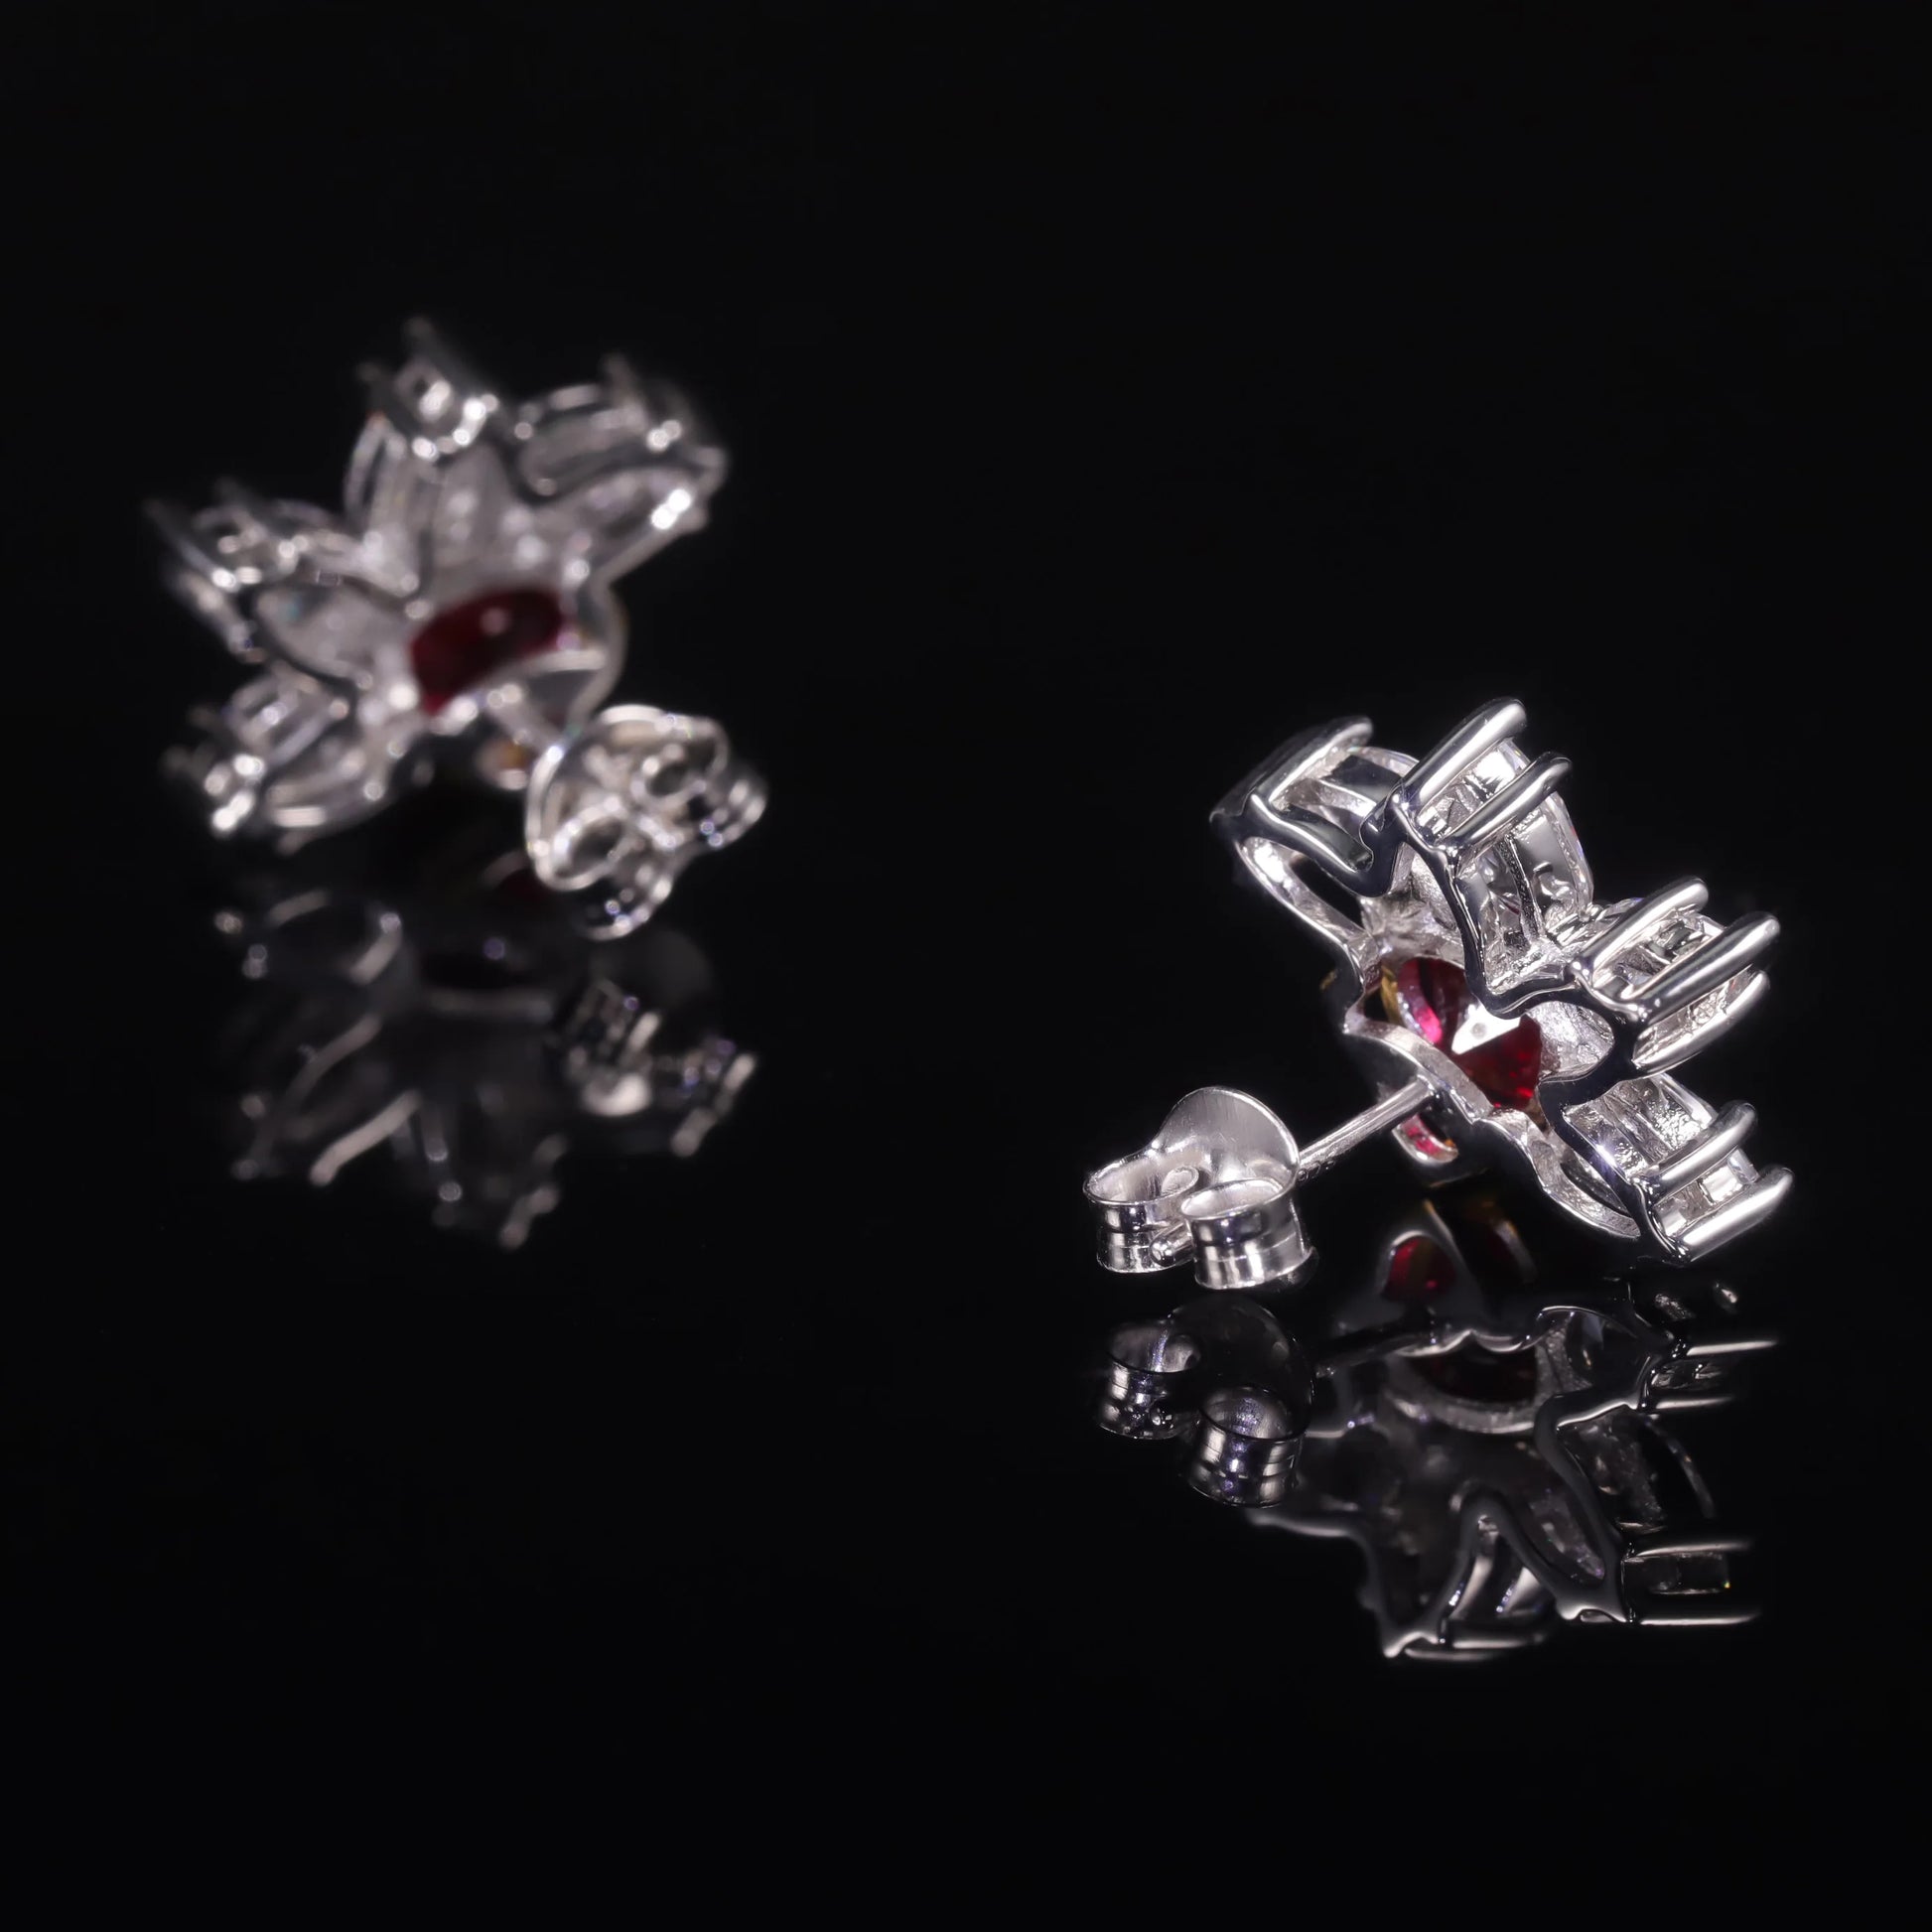 GEM'S BALLET Palm Leaf Fabulous Earring Luxury Lab Created Ruby Earring Exquisite Vintage Design Earrings 925 Sterling Silver